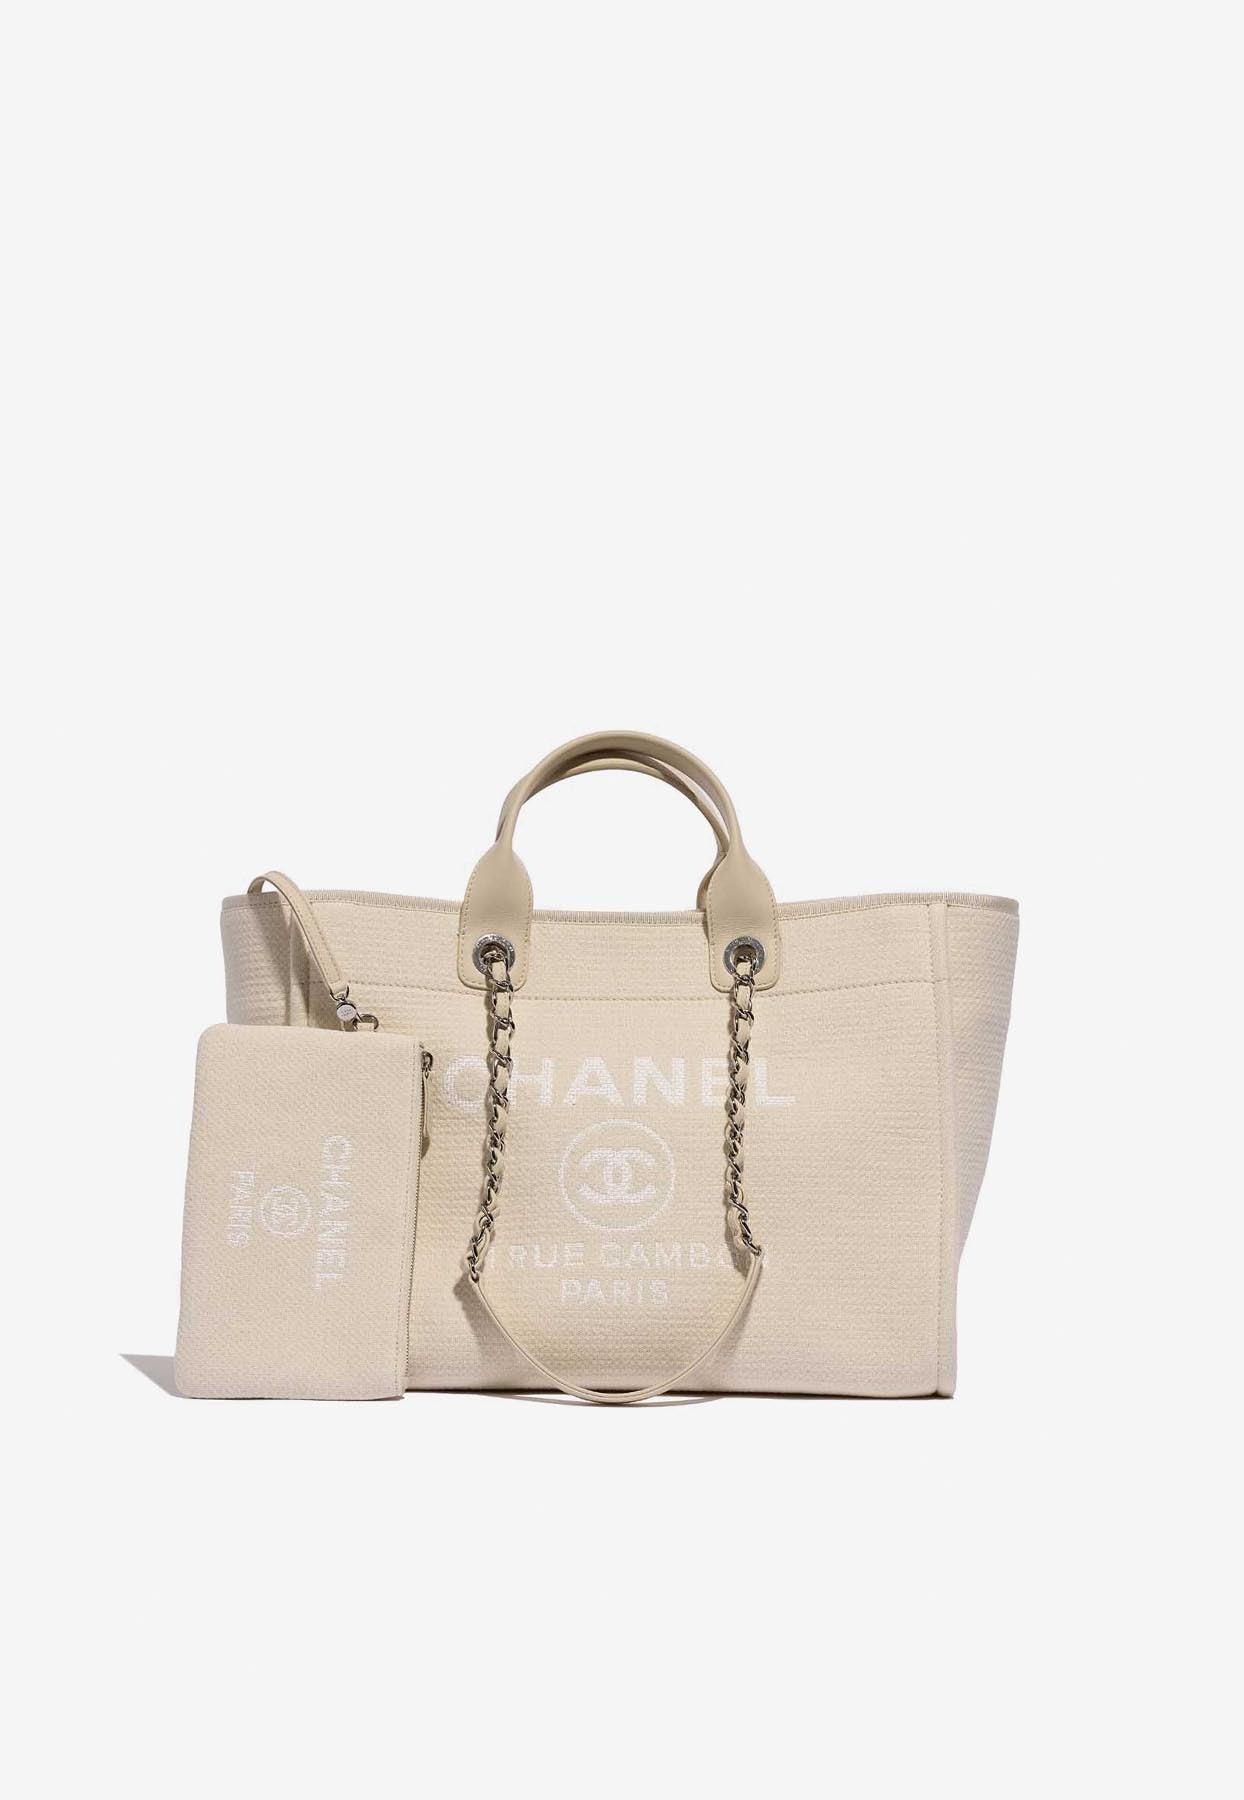 Chanel Medium Deauville Shopping Bag In Beige And White Canvas in Natural |  Lyst